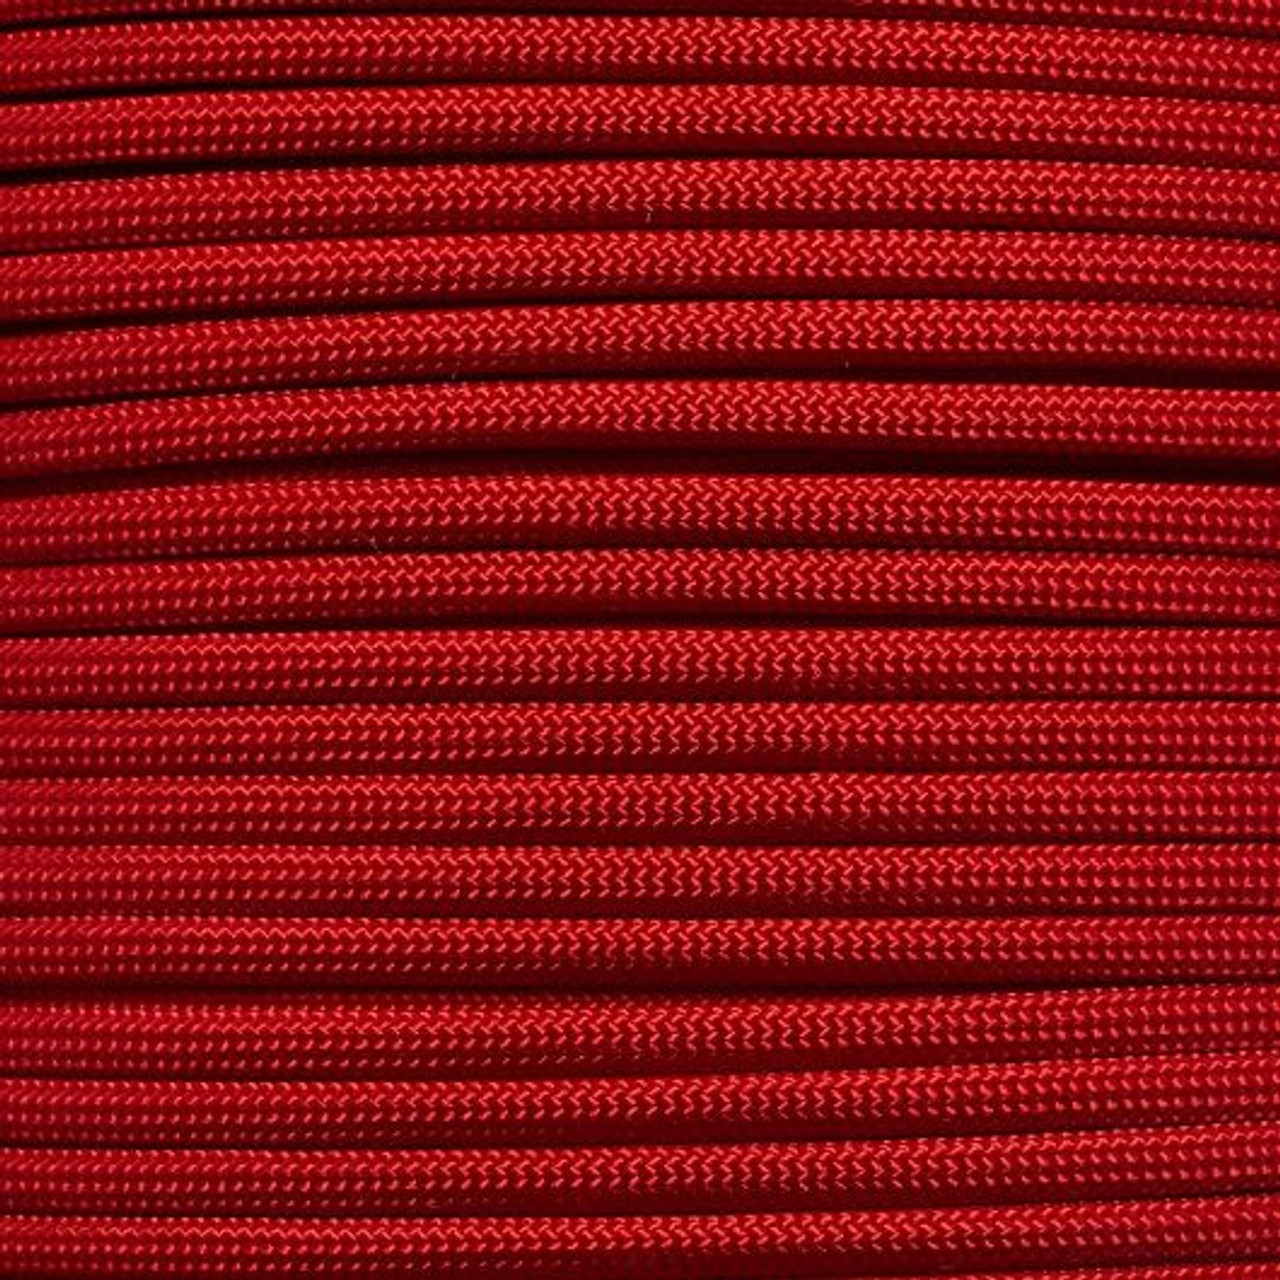 Imperial Red - 550 Paracord - 100ft